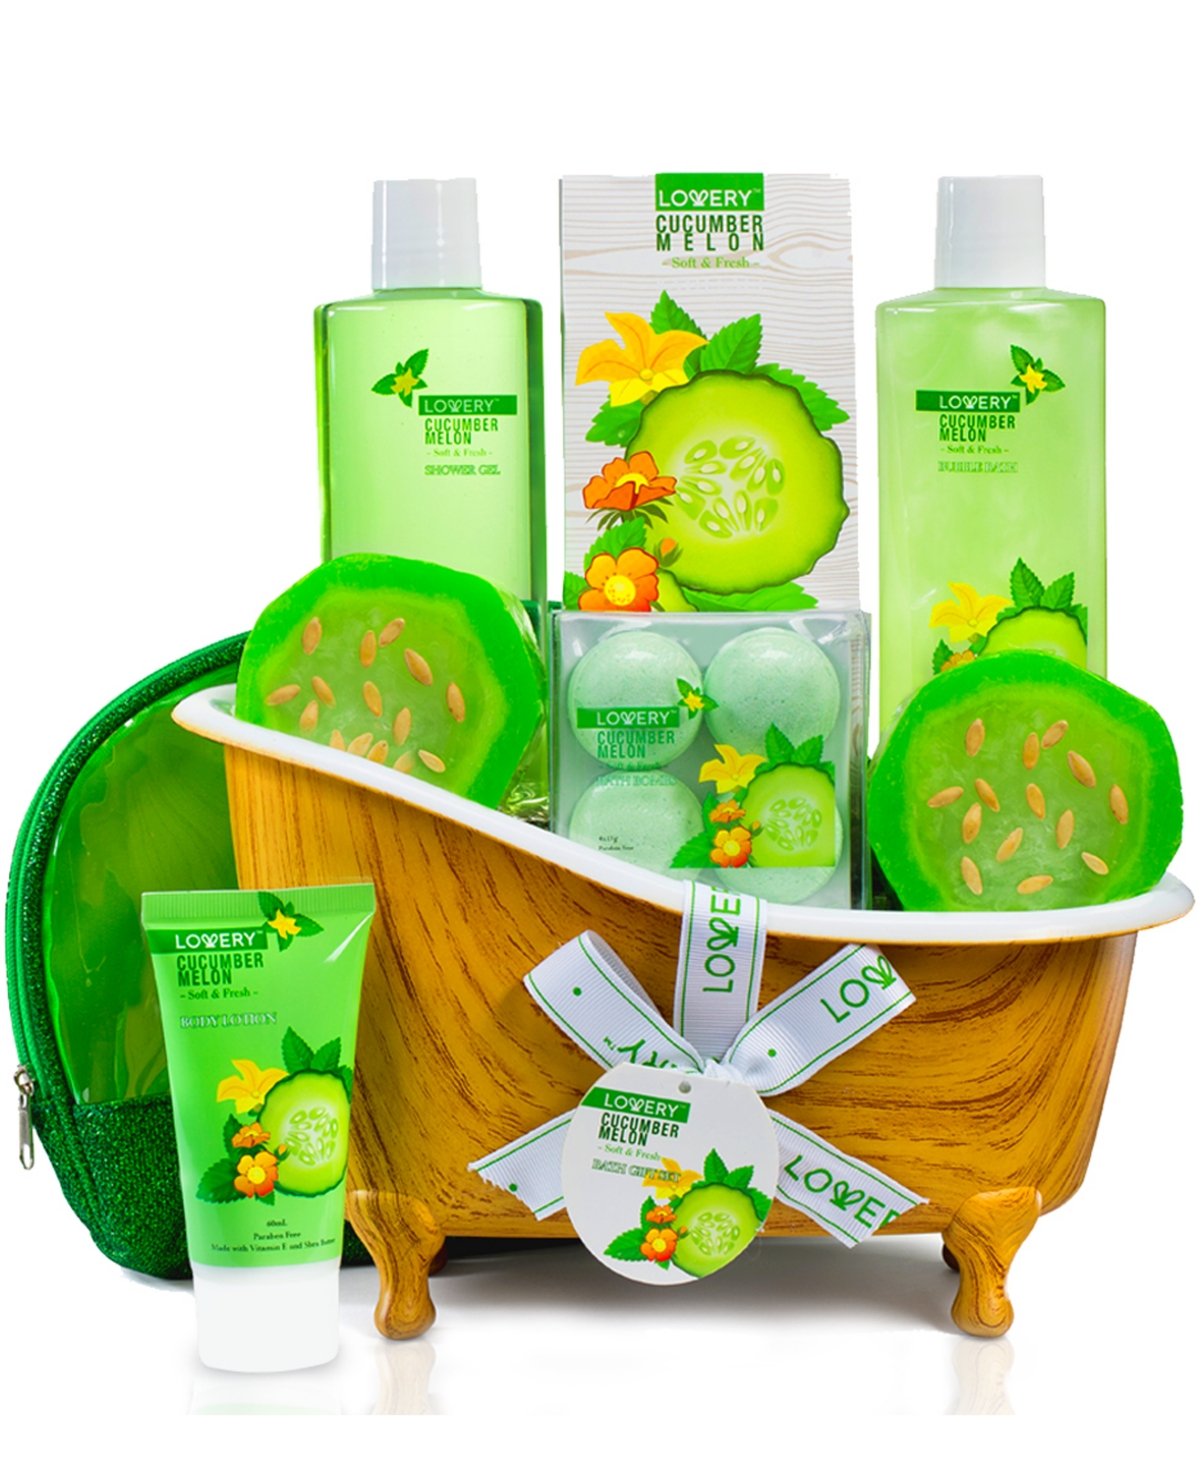 Lovery Organic Cucumber Melon Bath and Body Care Gift Set, Relaxing Home Spa Kit, 12 Piece